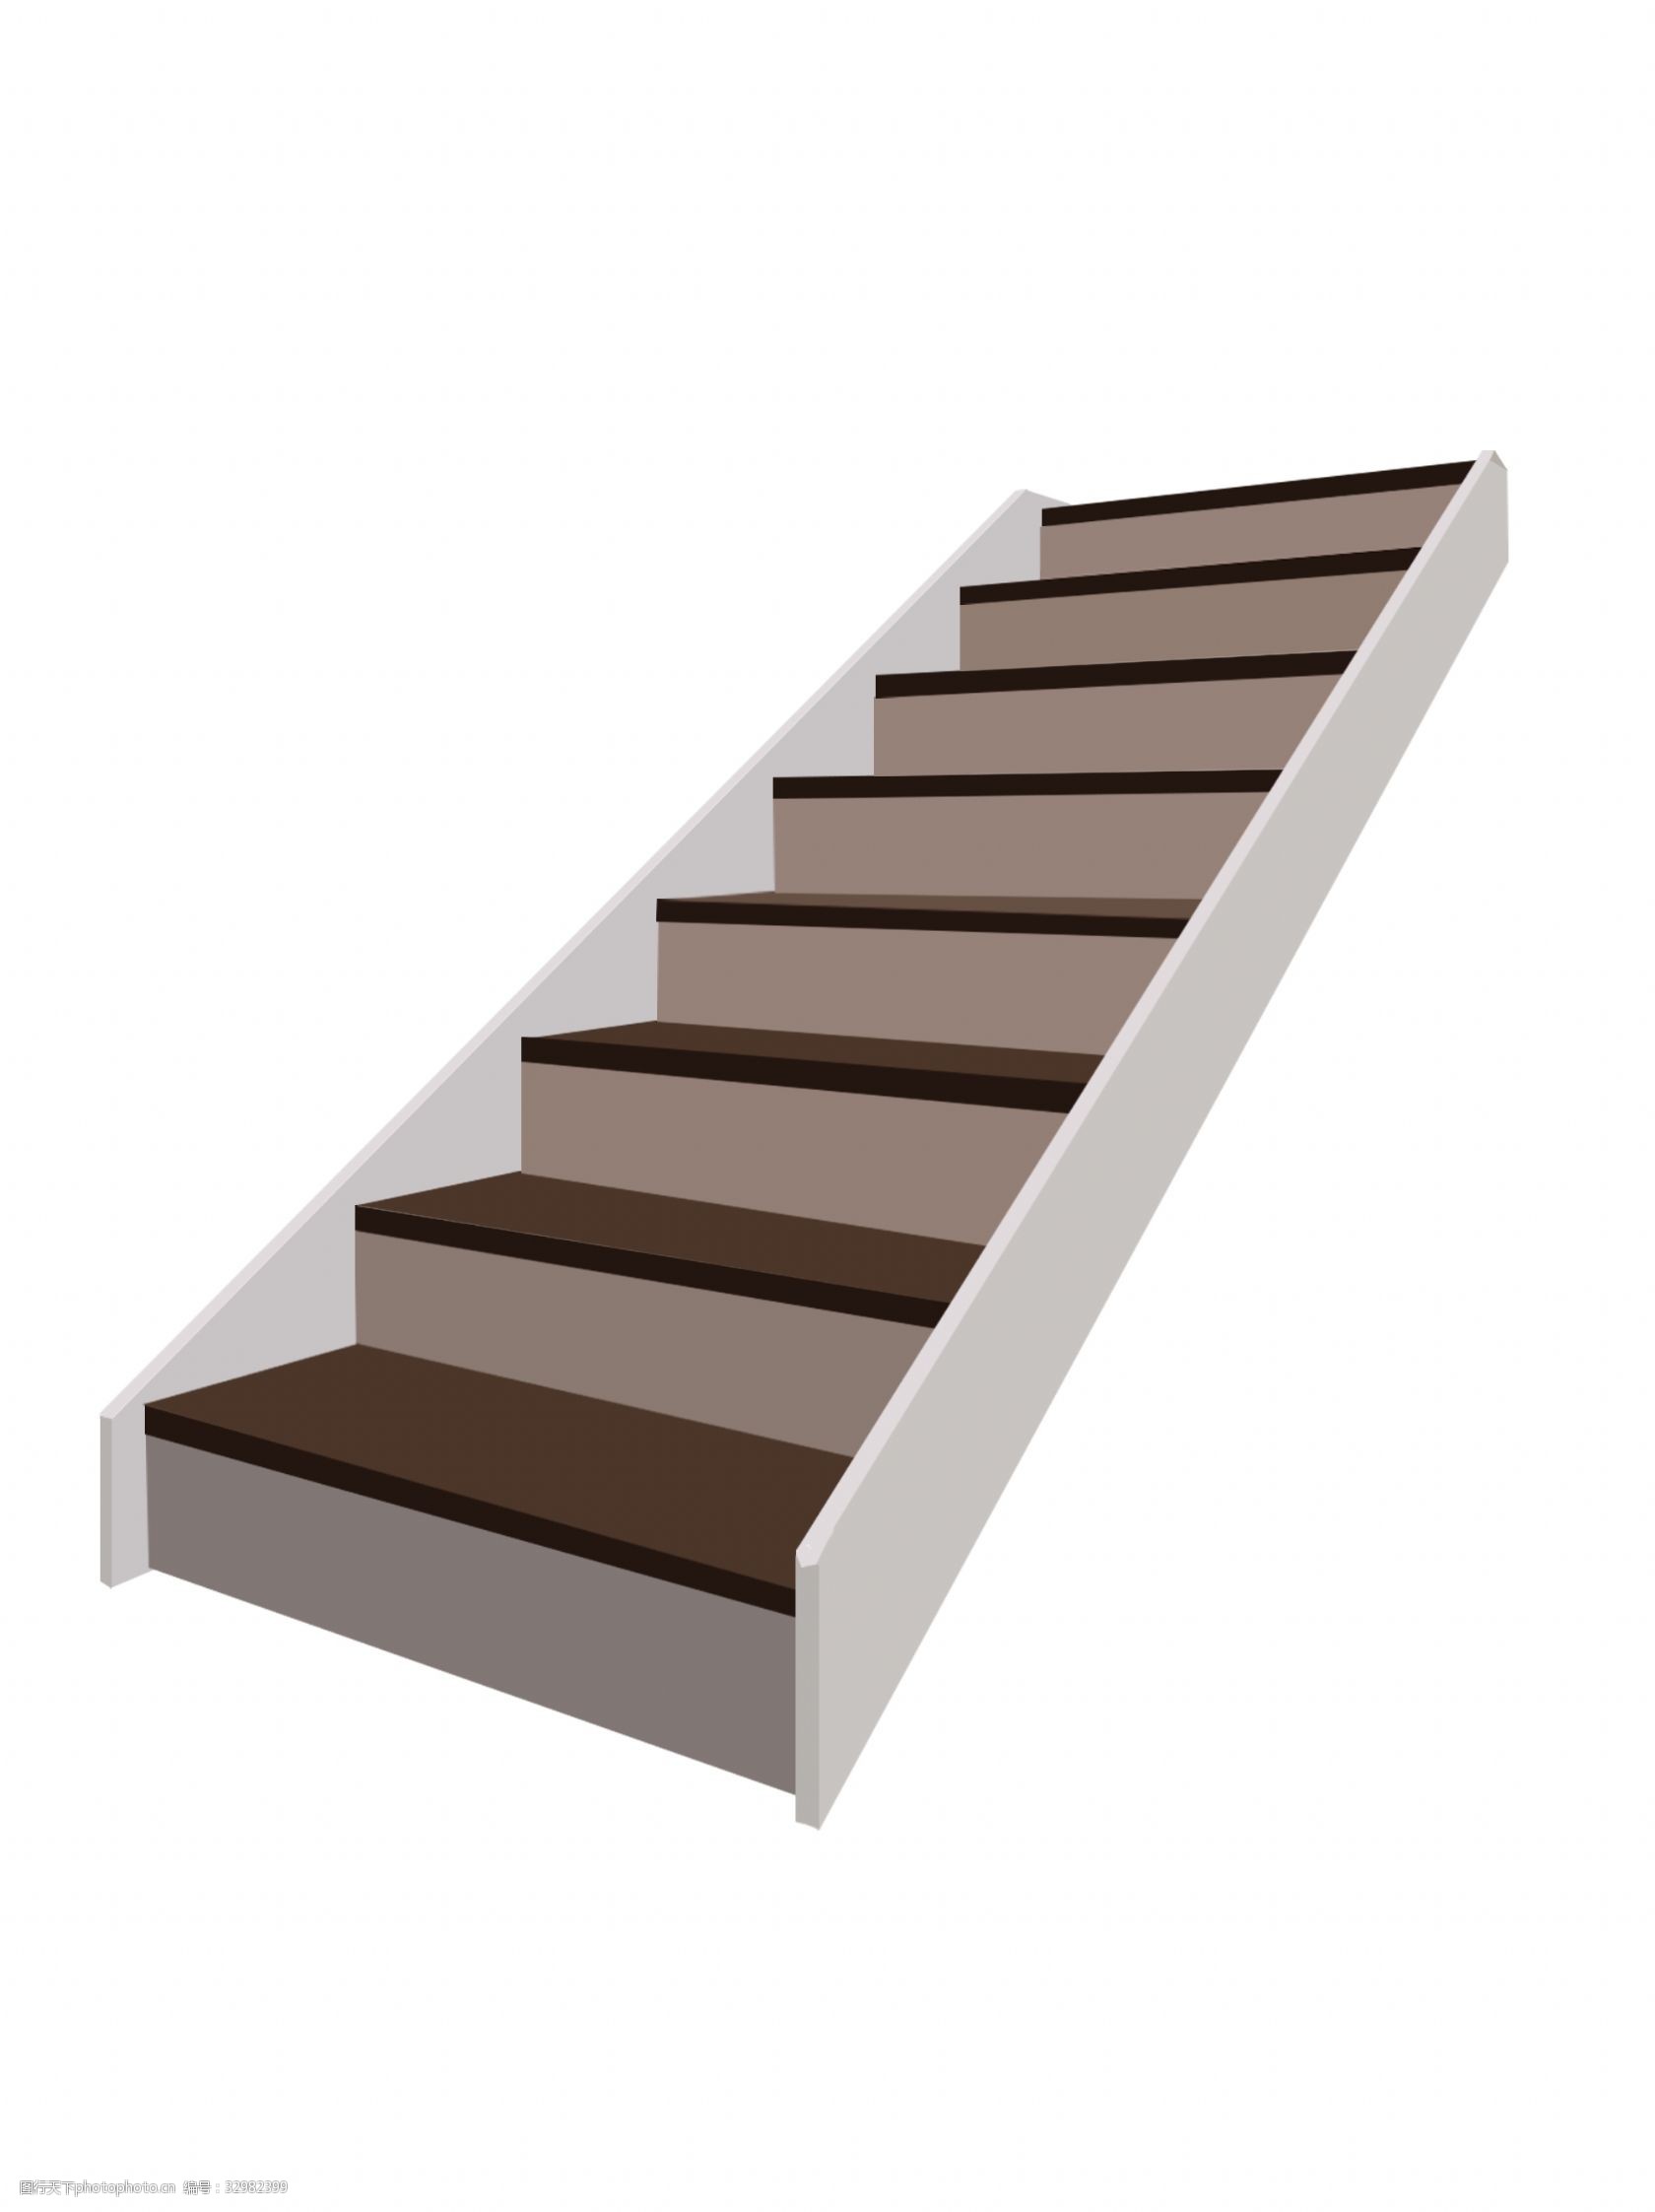 Red Stair Clipart Transparent PNG Hd, Red Stairs Cartoon Illustration ...